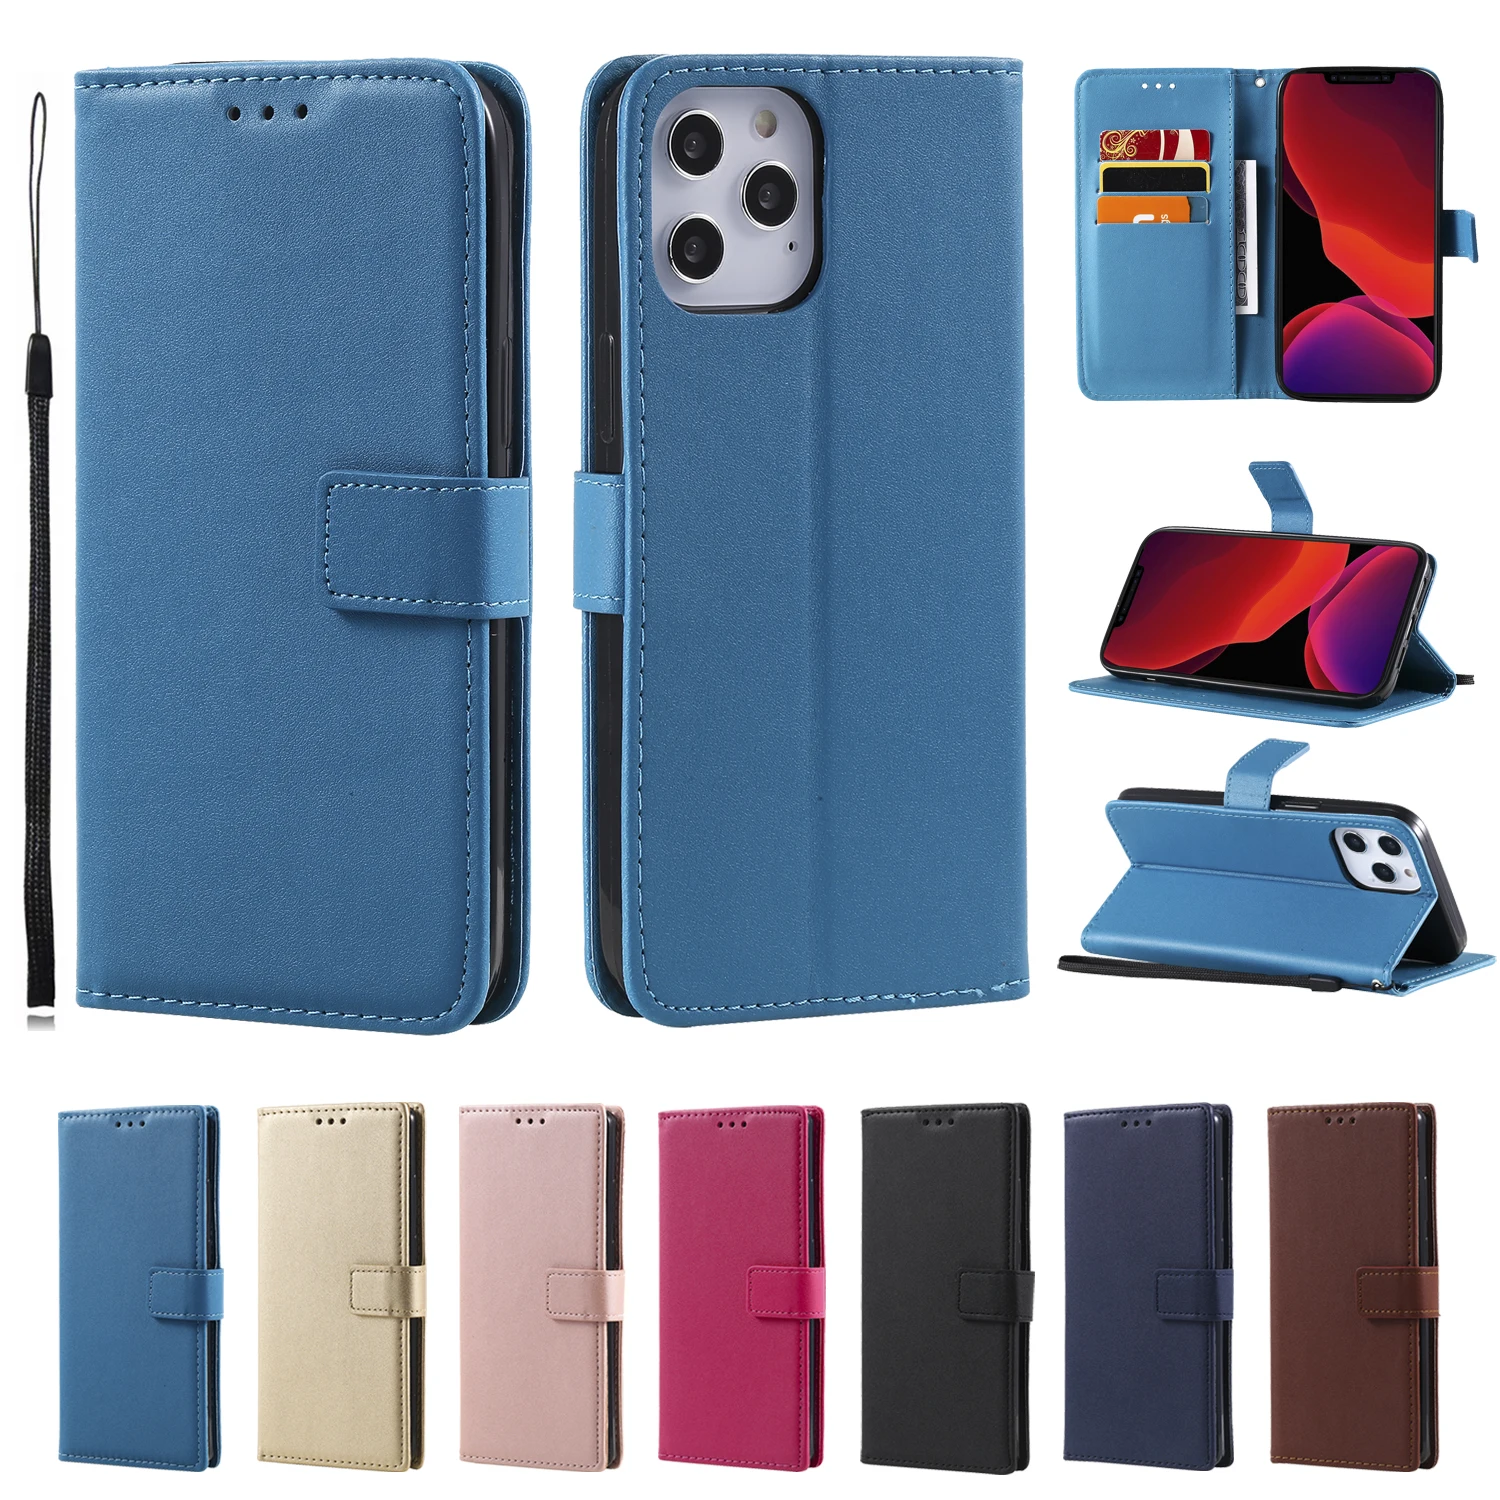 

PU Leather Wallet Phone Case For Samsung Galaxy J1 2016 J3 J5 Prime J7 2017 J2 Pro J4 J6 Plus 2018 Flip Card Slots Stand Cover